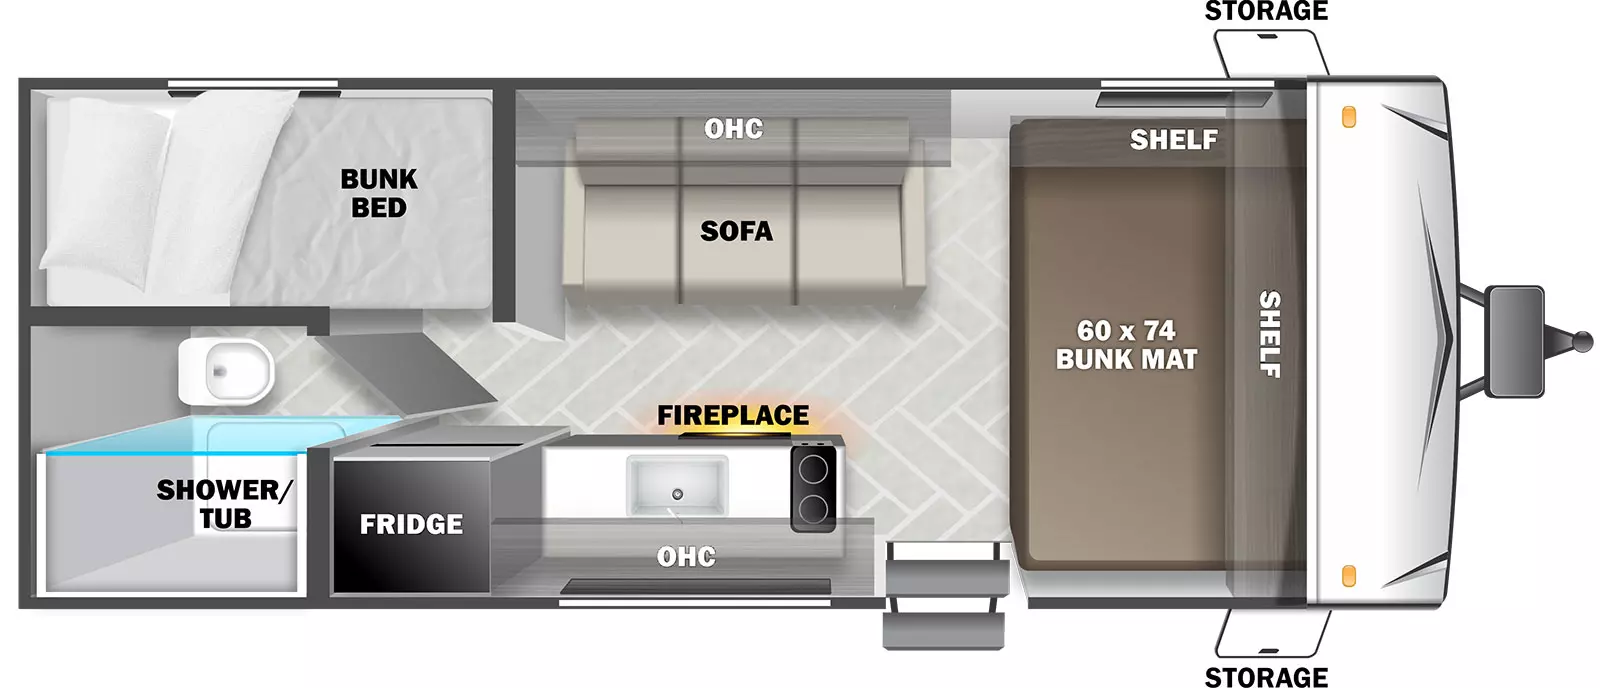 The 175BHGT has no slide outs and 1 entry door. Interior layout from front to back: front 60 x 74 bunk mat with shelves above; off-door side sofa with overhead cabinet; door side kitchen with sink, refrigerator, fireplace, overhead cabinet and stove top; rear door side bathroom with shower/tub and toilet; and rear off-door side bunk bed.